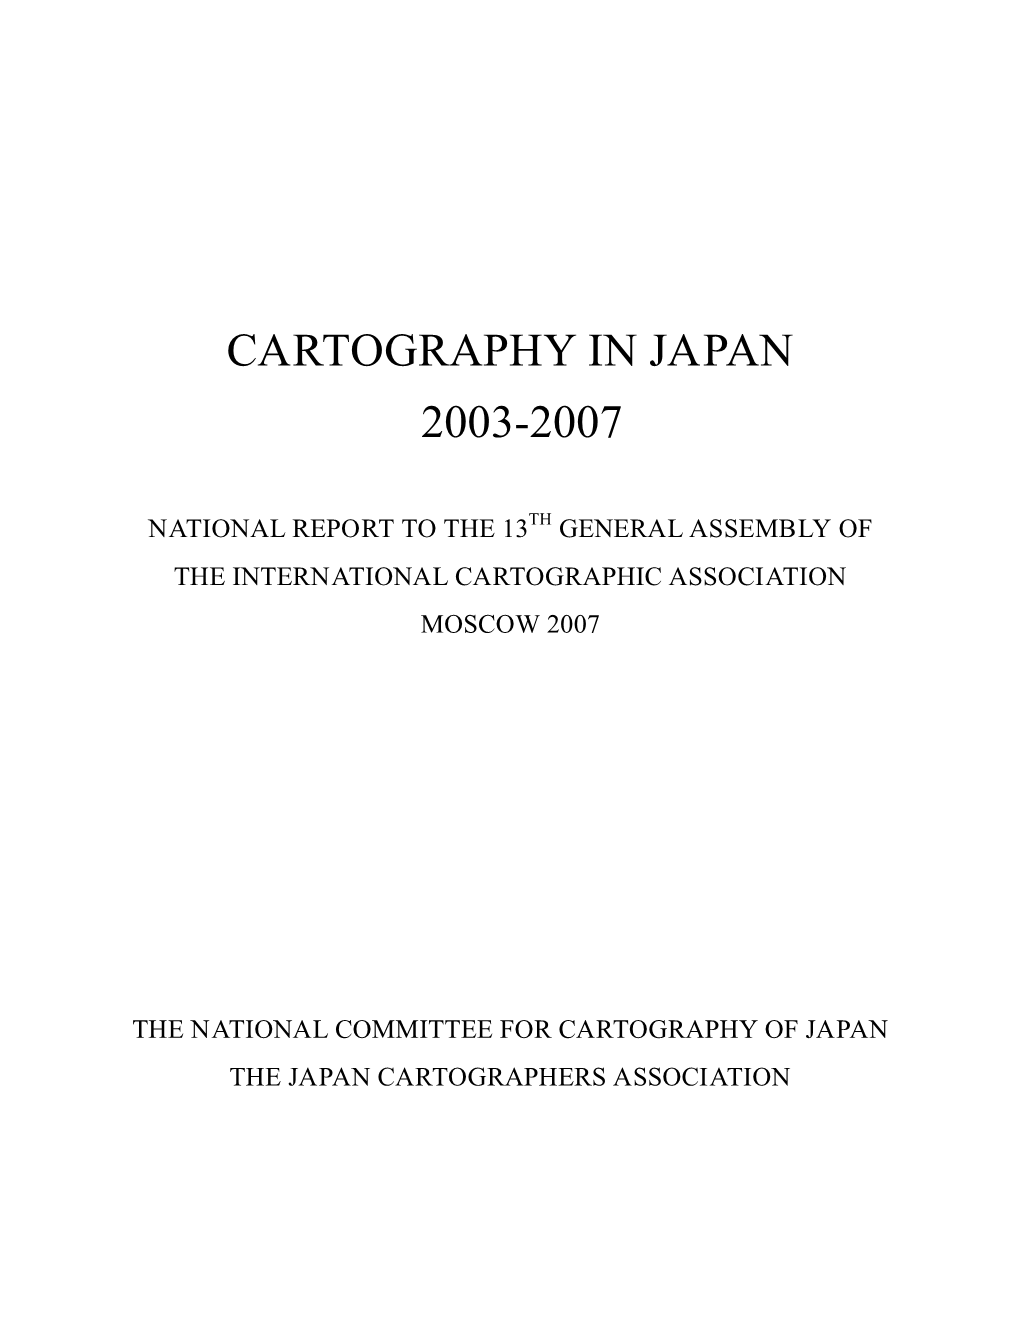 Cartography in Japan 2003-2007